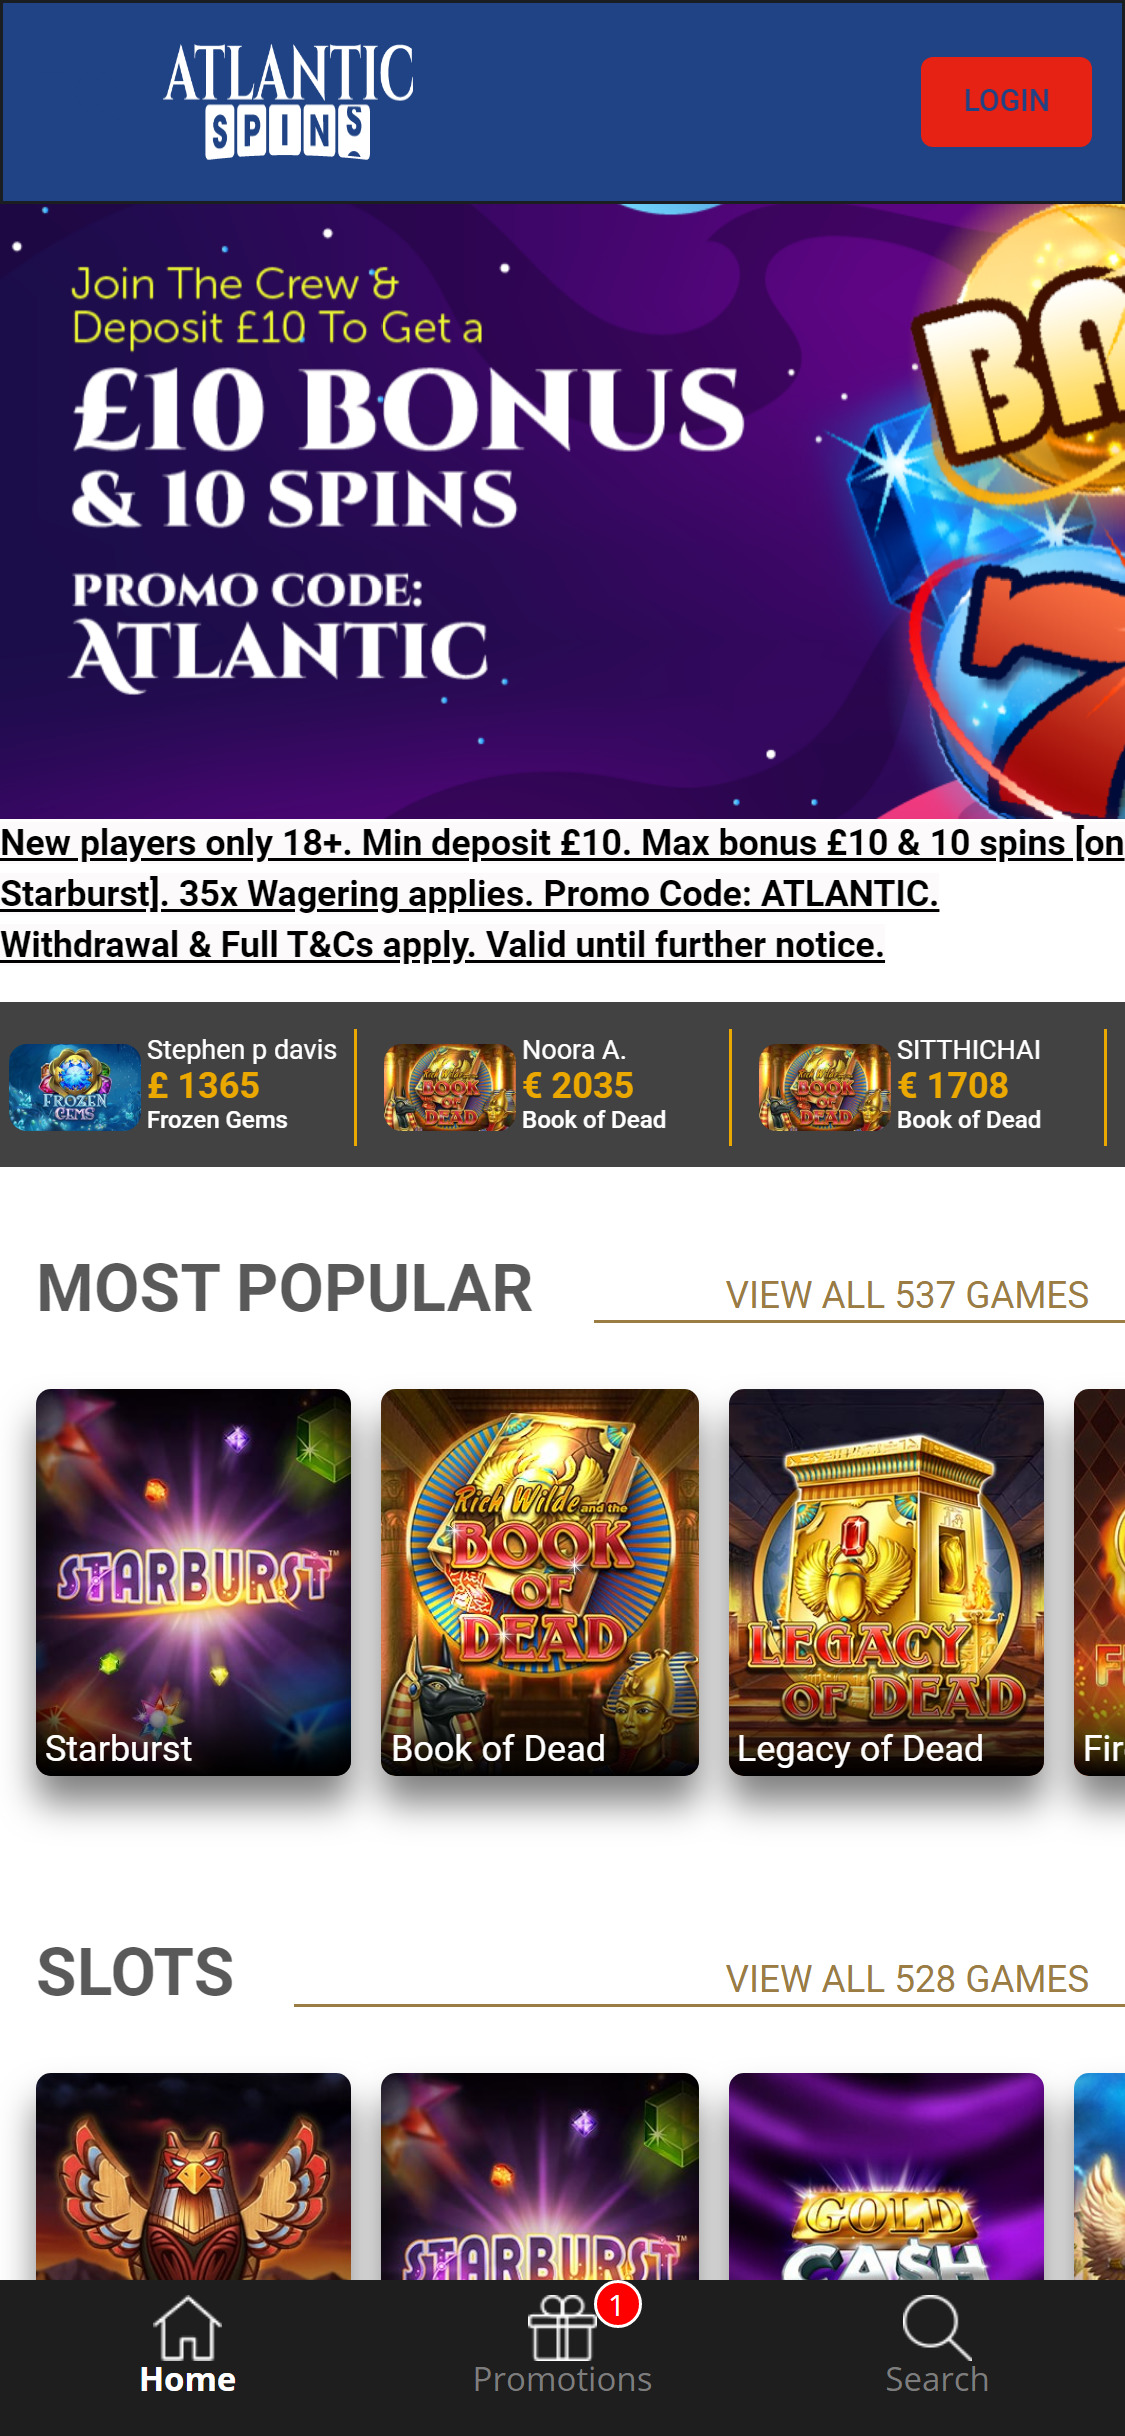 Atlantic Spins Casino Mobile Review